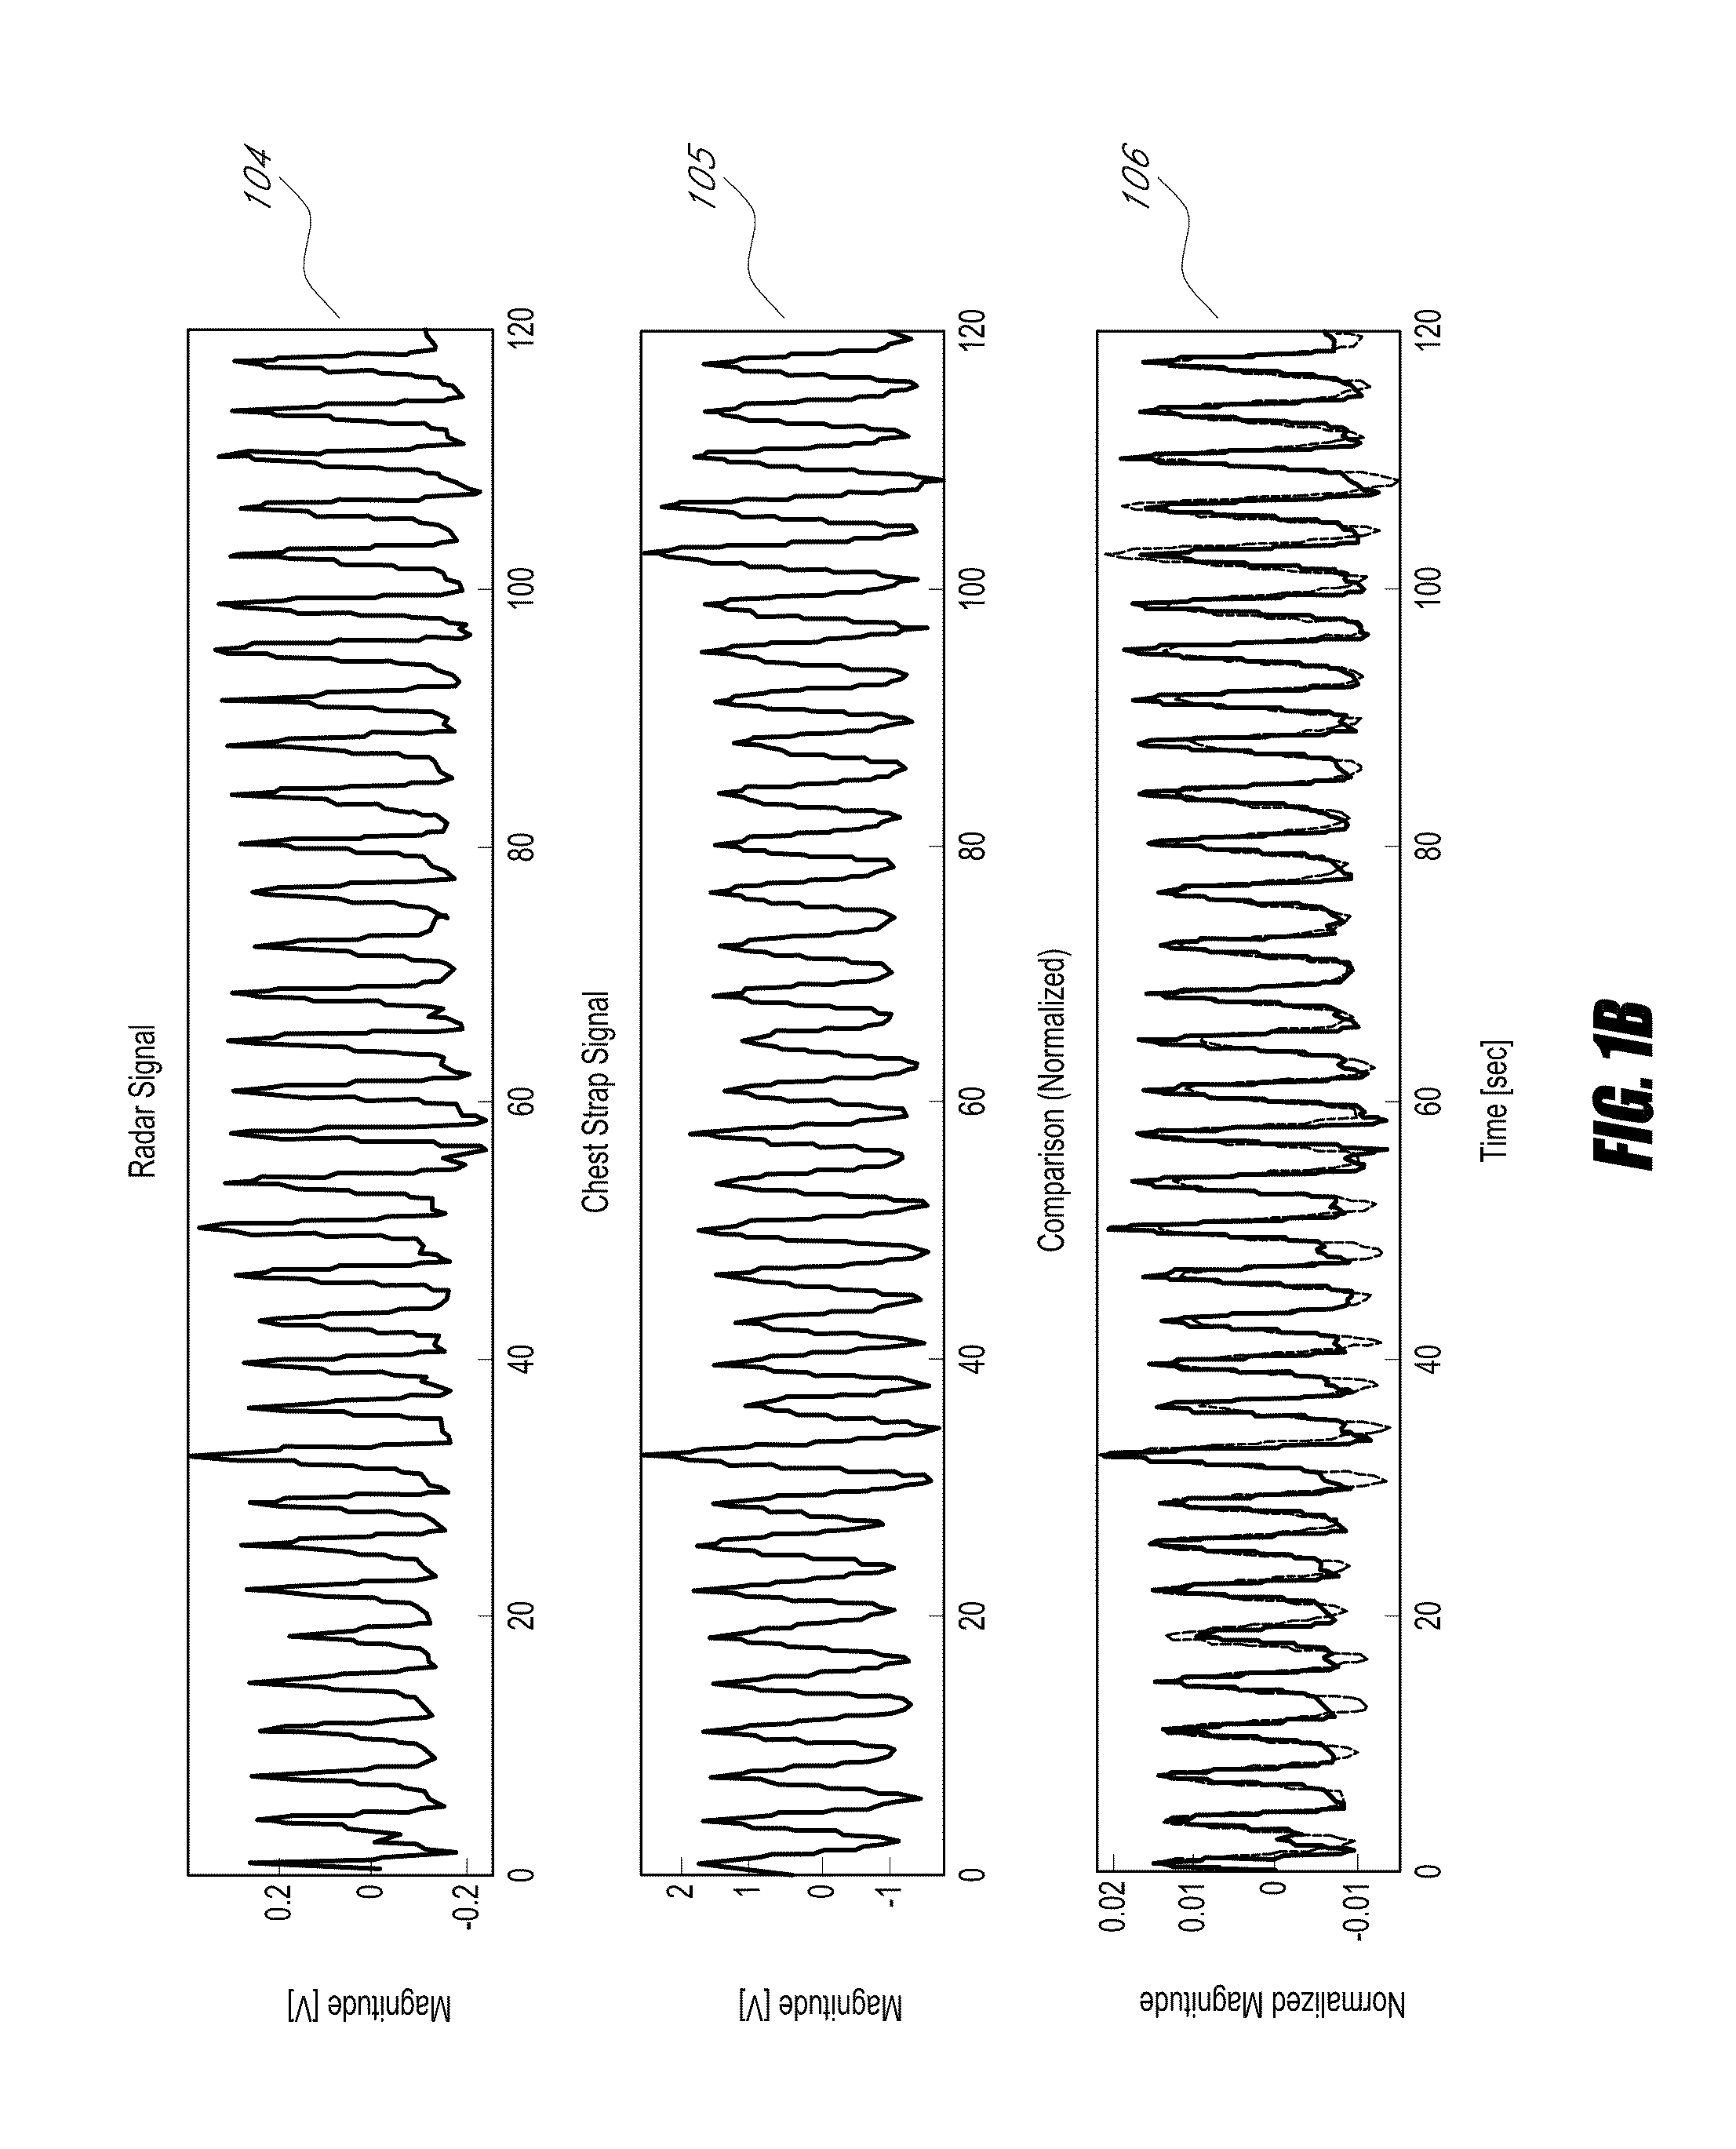 Non-contact physiologic motion sensors and methods for use